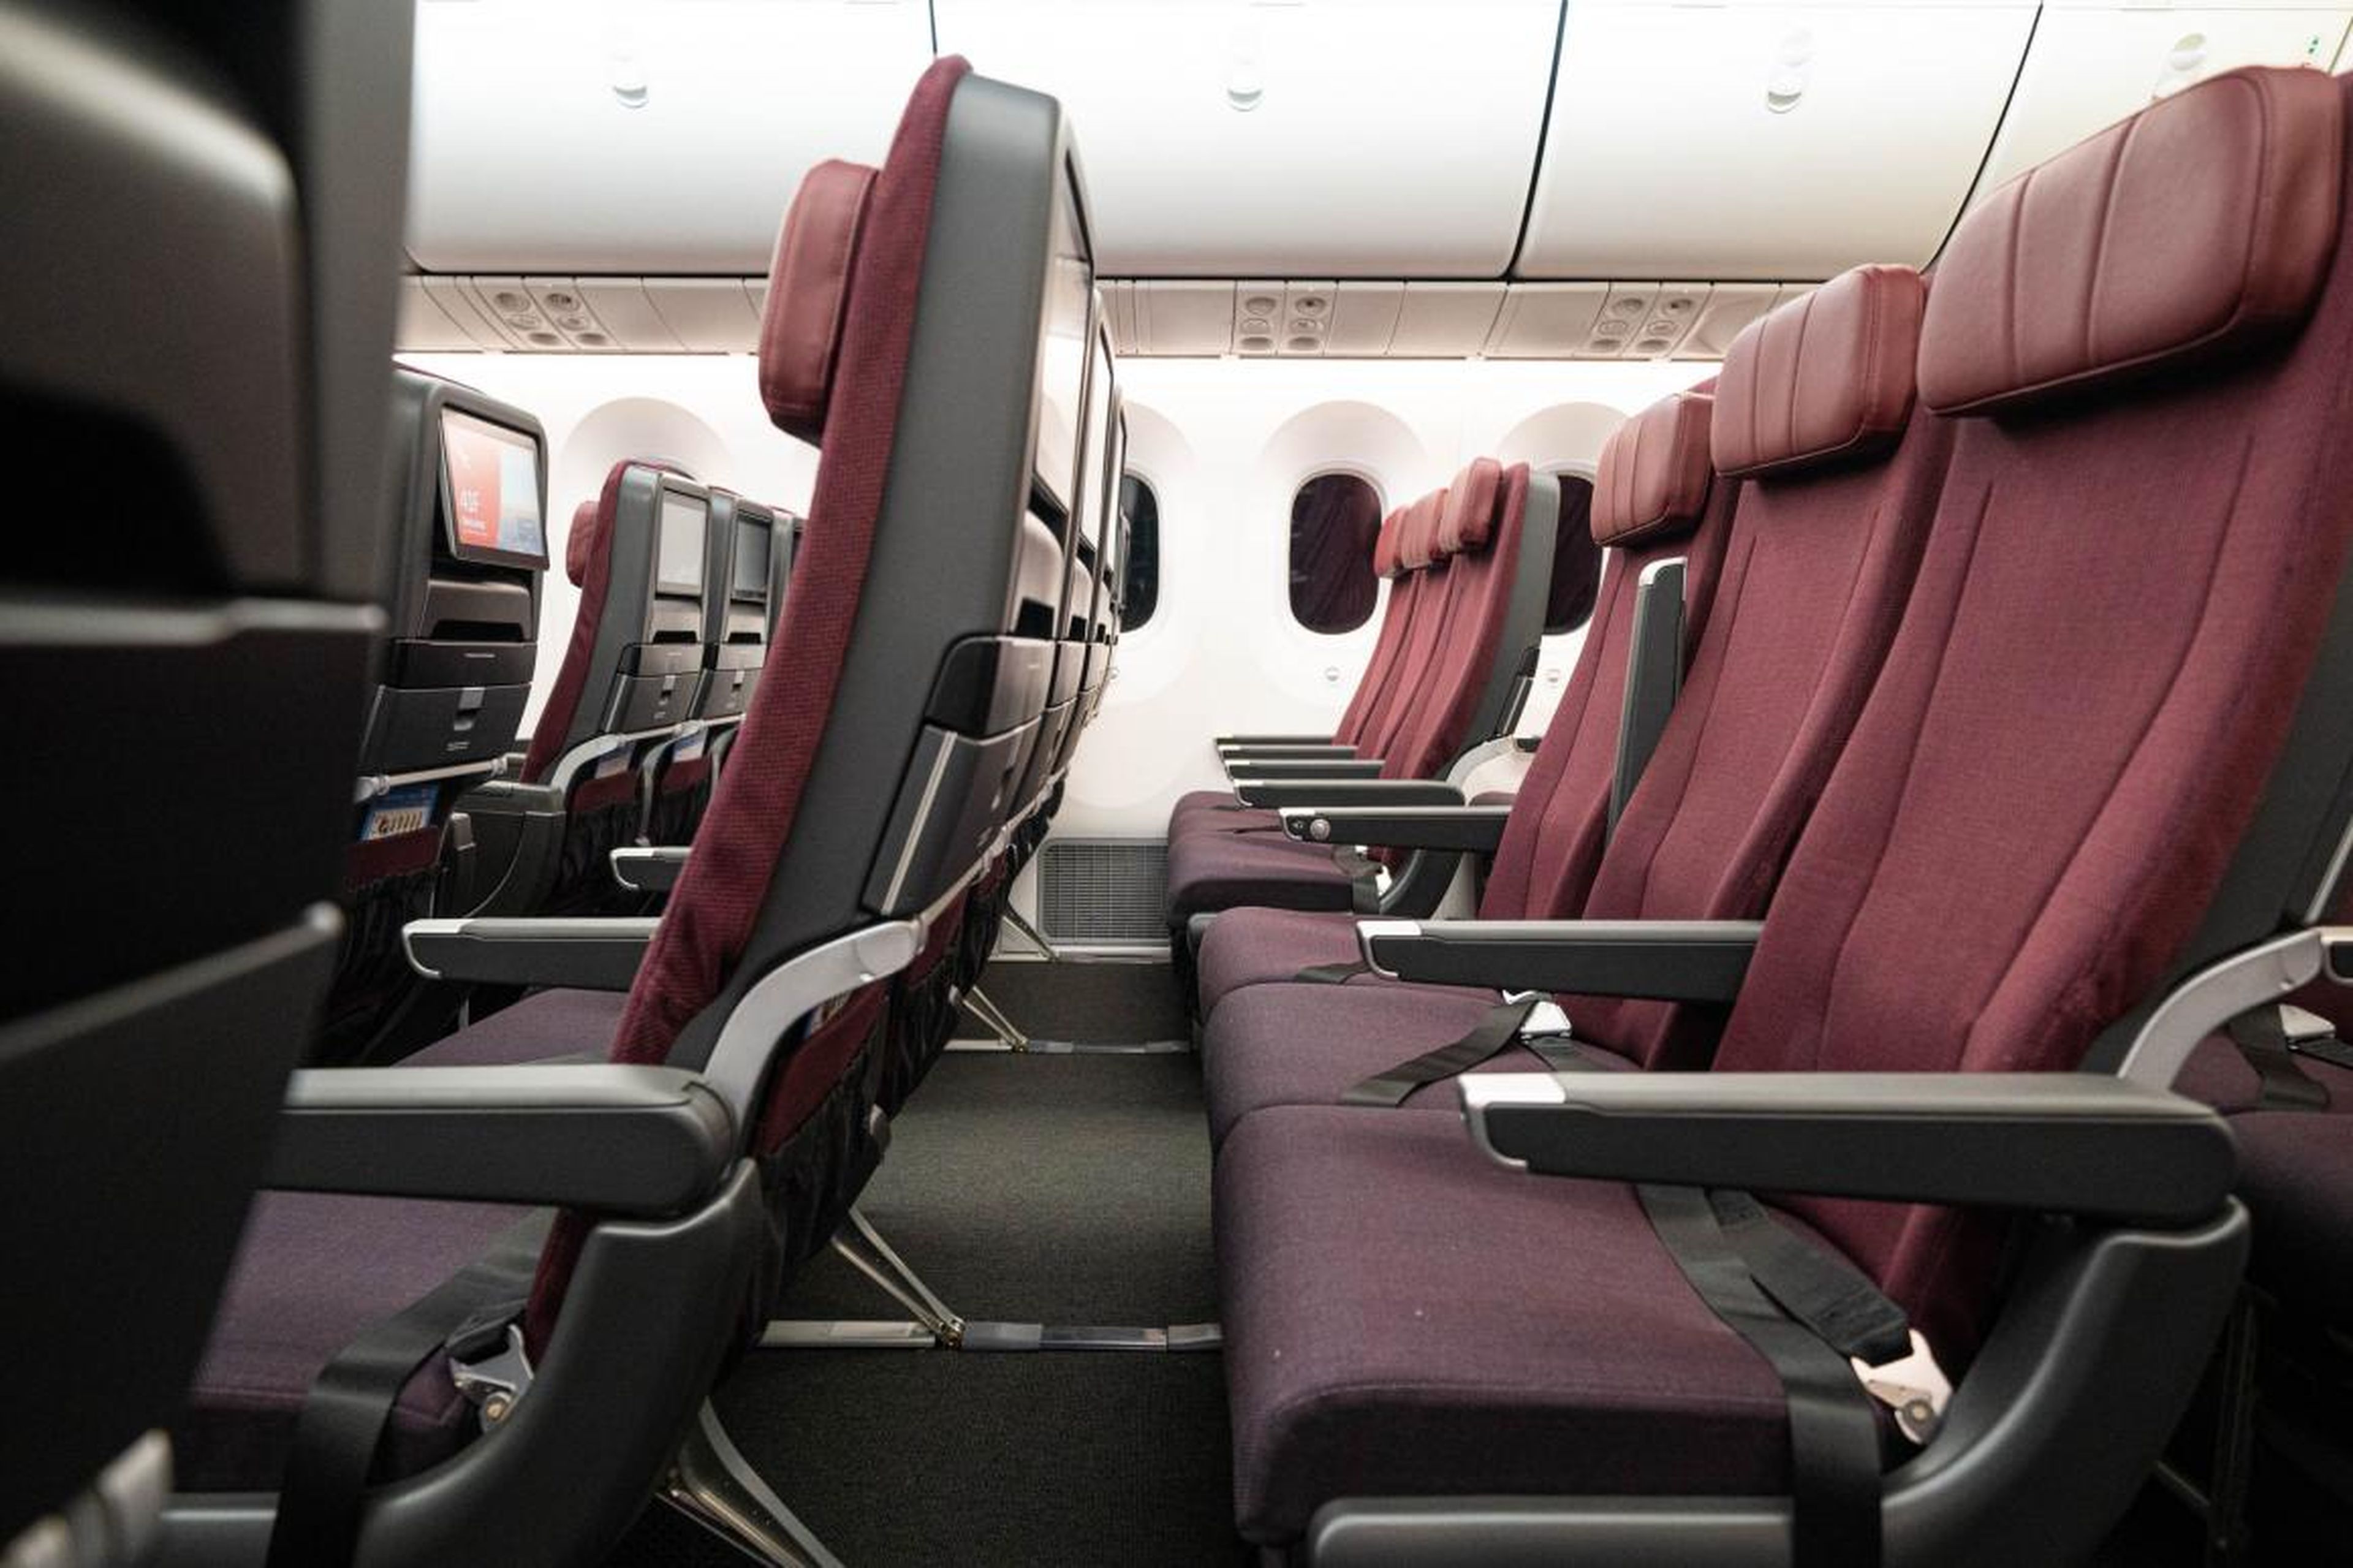 Economy seats have about 32 inches of pitch, which is on the higher side of standard for long-haul airplanes.